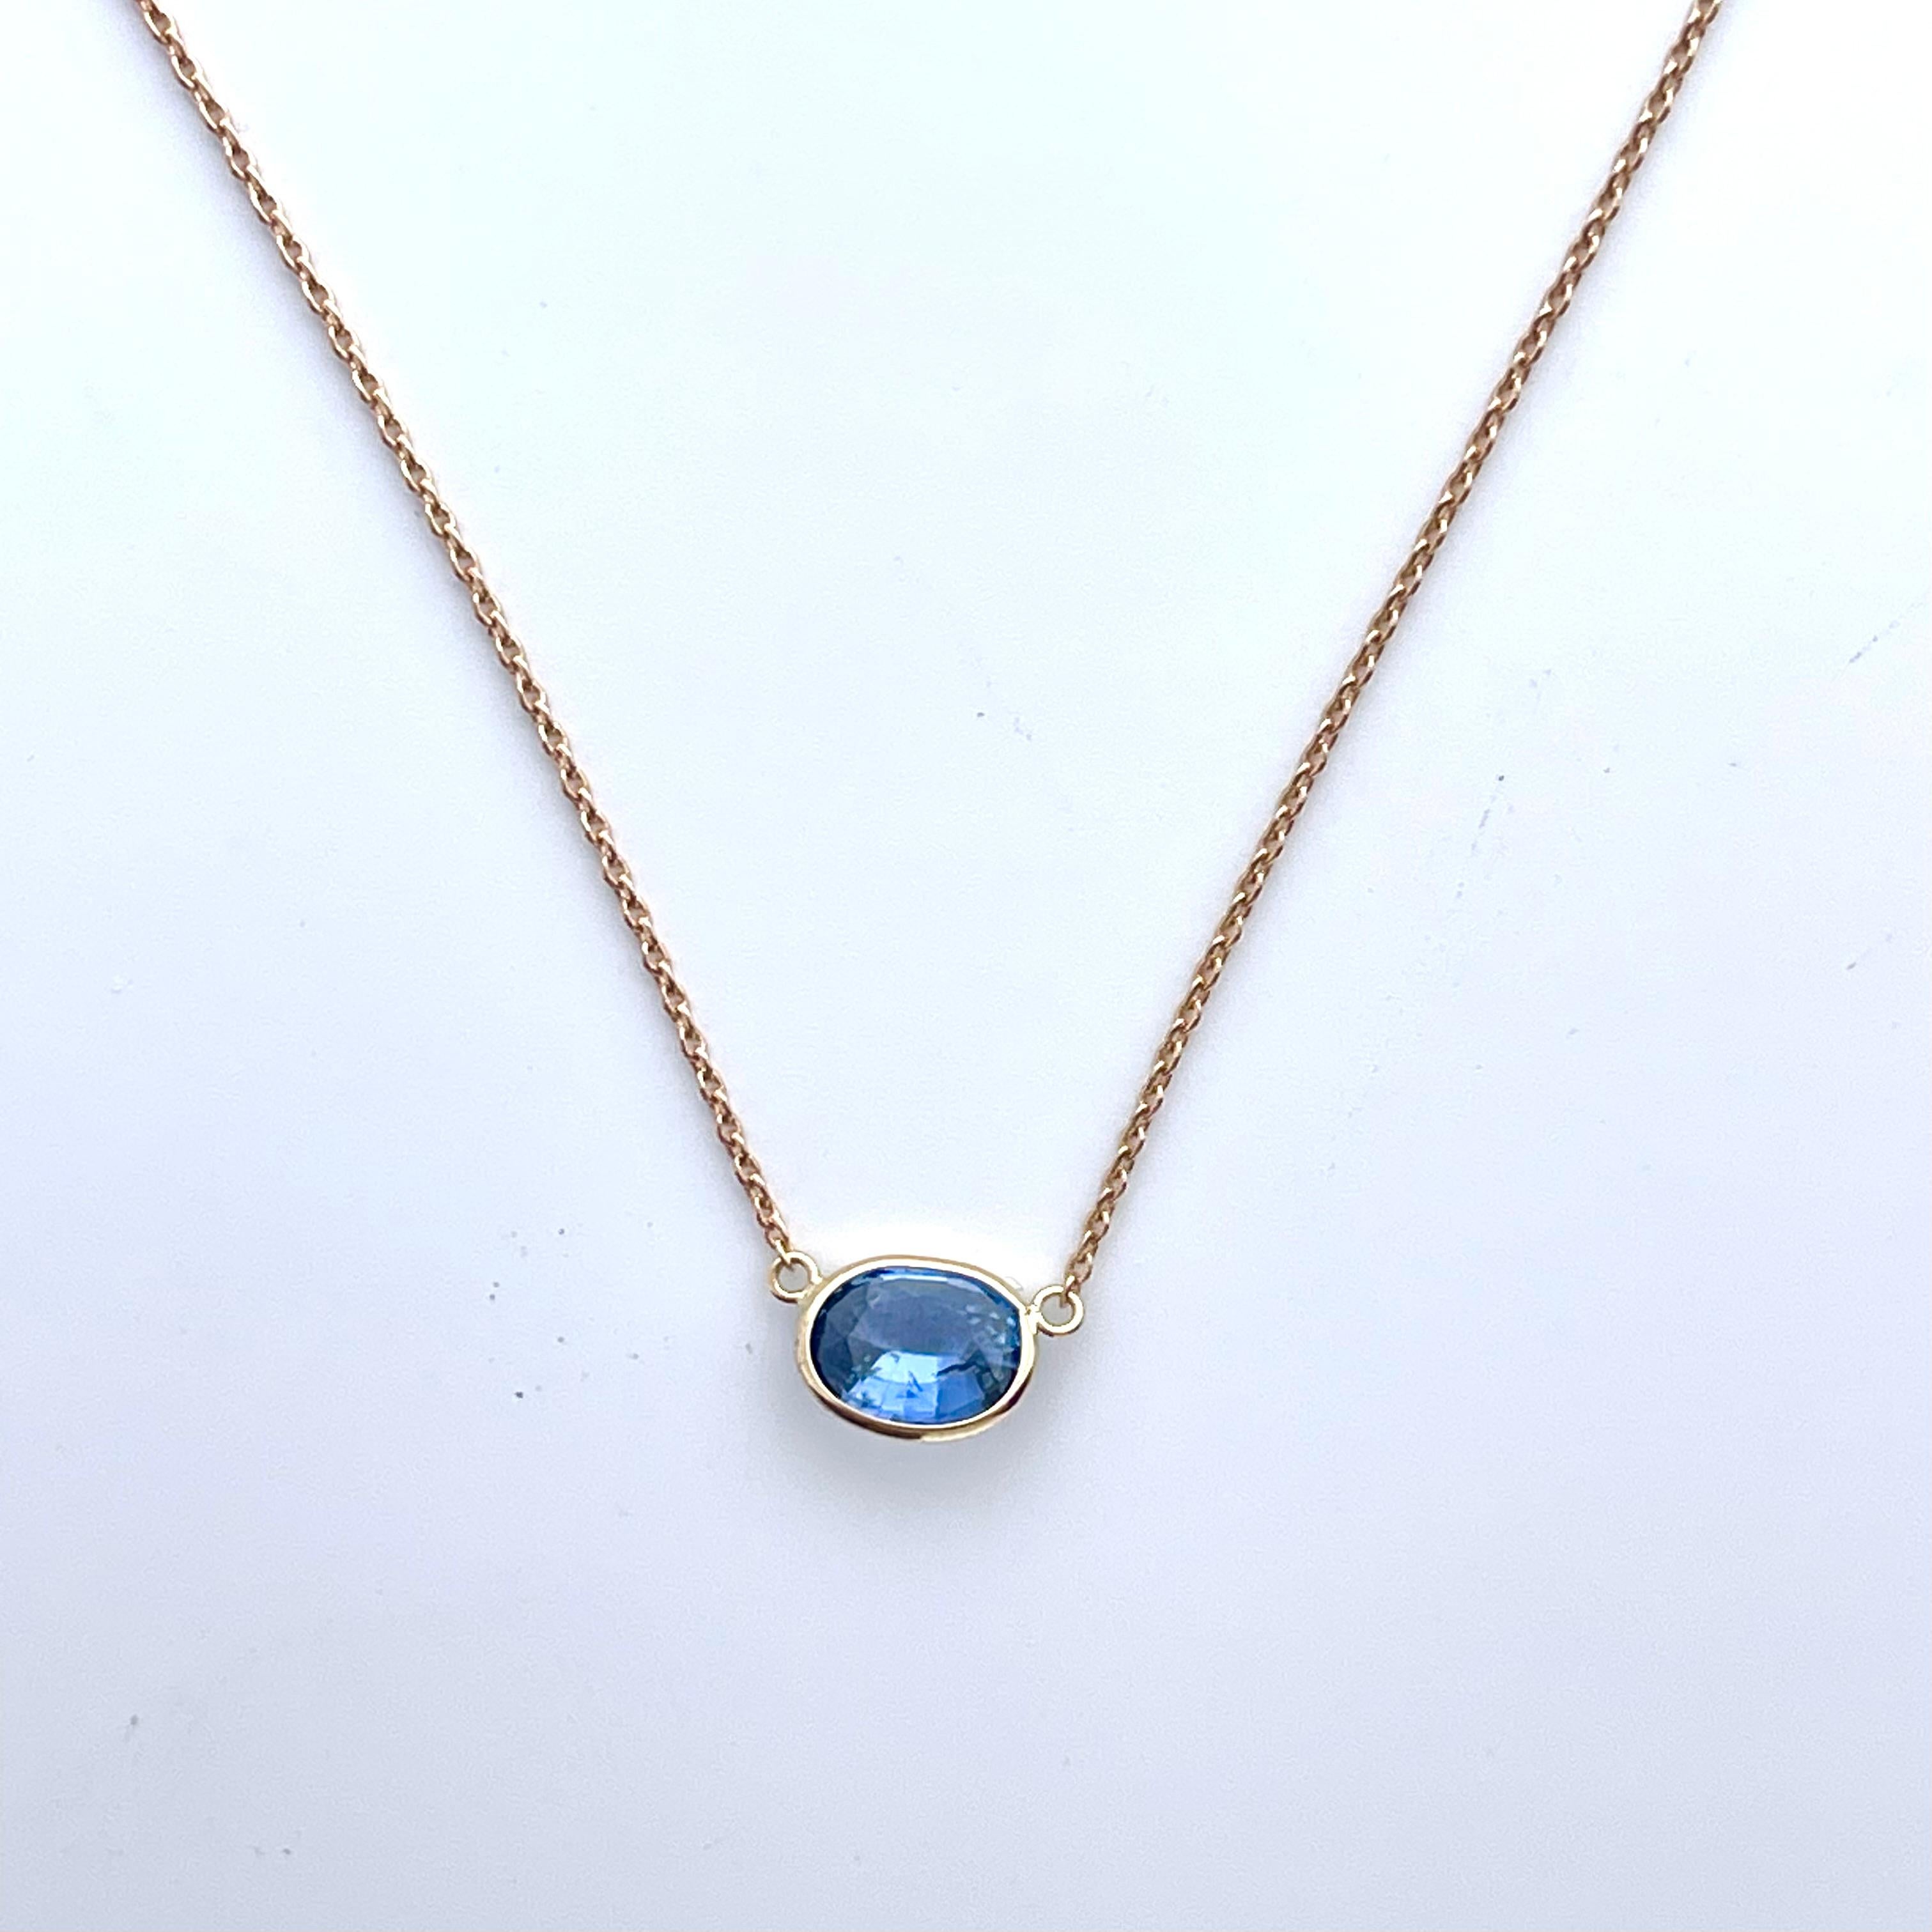 A fashion necklace made of 14k rose gold with a main stone of an oval-cut blue sapphire weighing 1.42 carats would be a stunning and elegant choice. Blue sapphires are renowned for their captivating and deep blue color, and the oval cut adds a